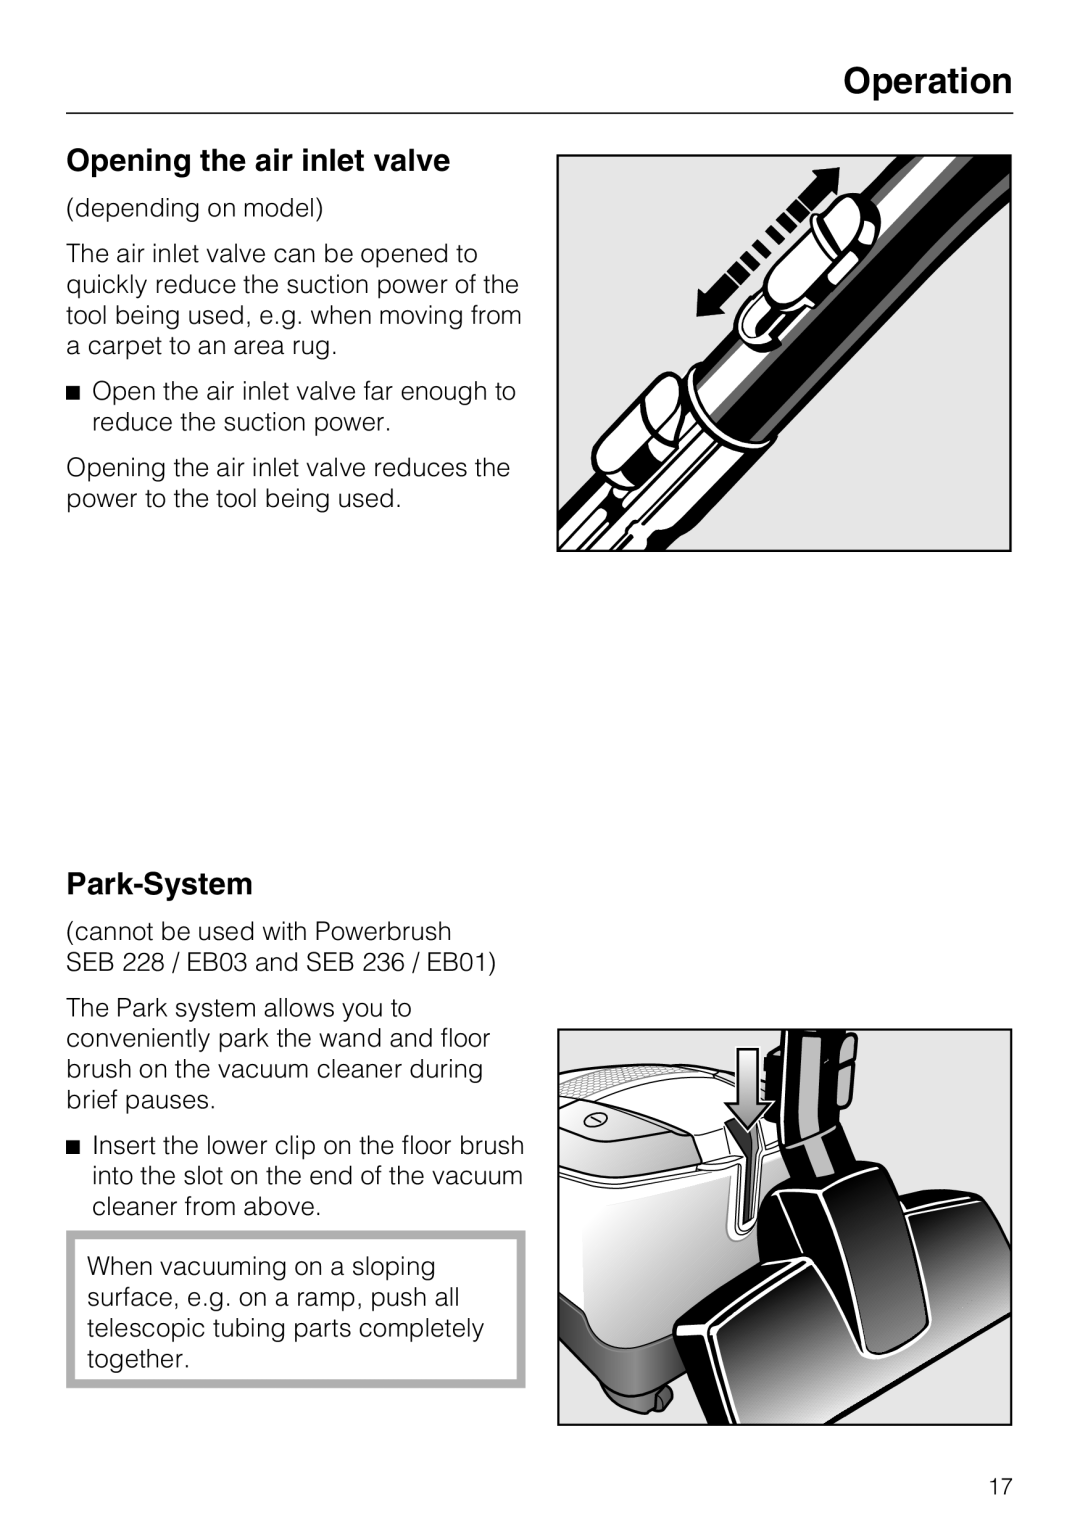 Miele S 6000 operating instructions Operation, Opening the air inlet valve, Park-System 